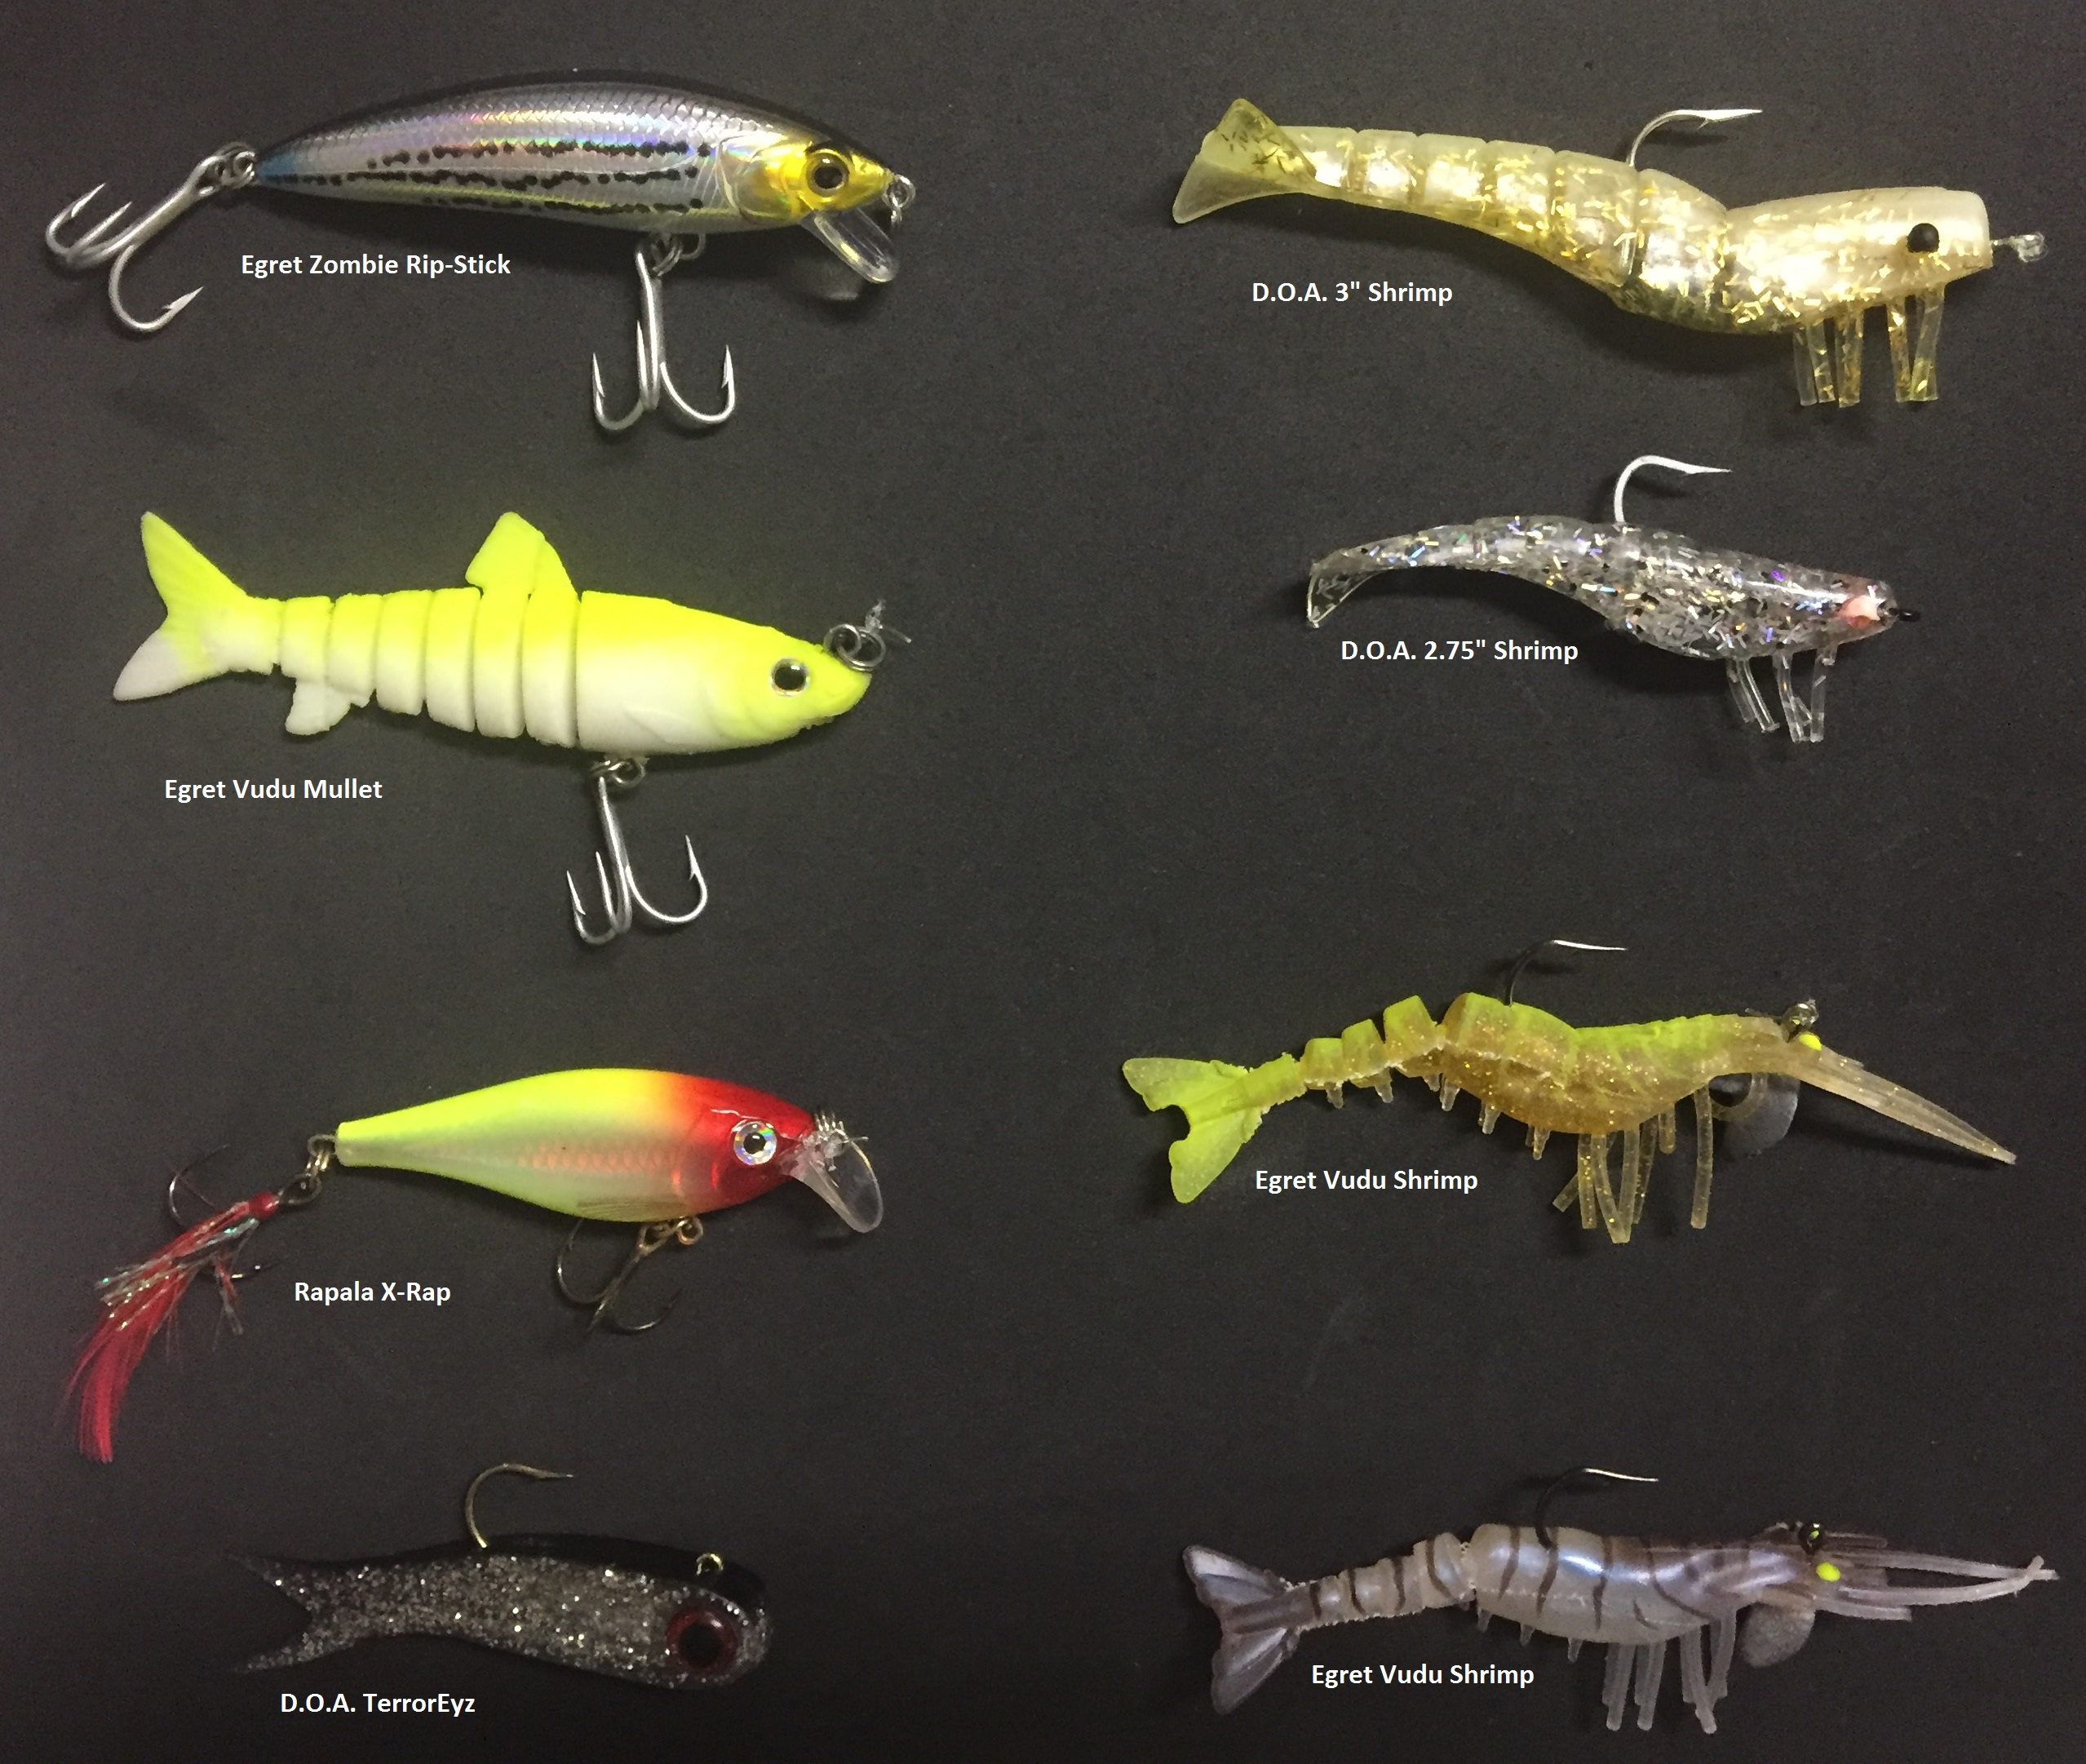 How to Use Floats & Live Bait for Spotted Sea Trout